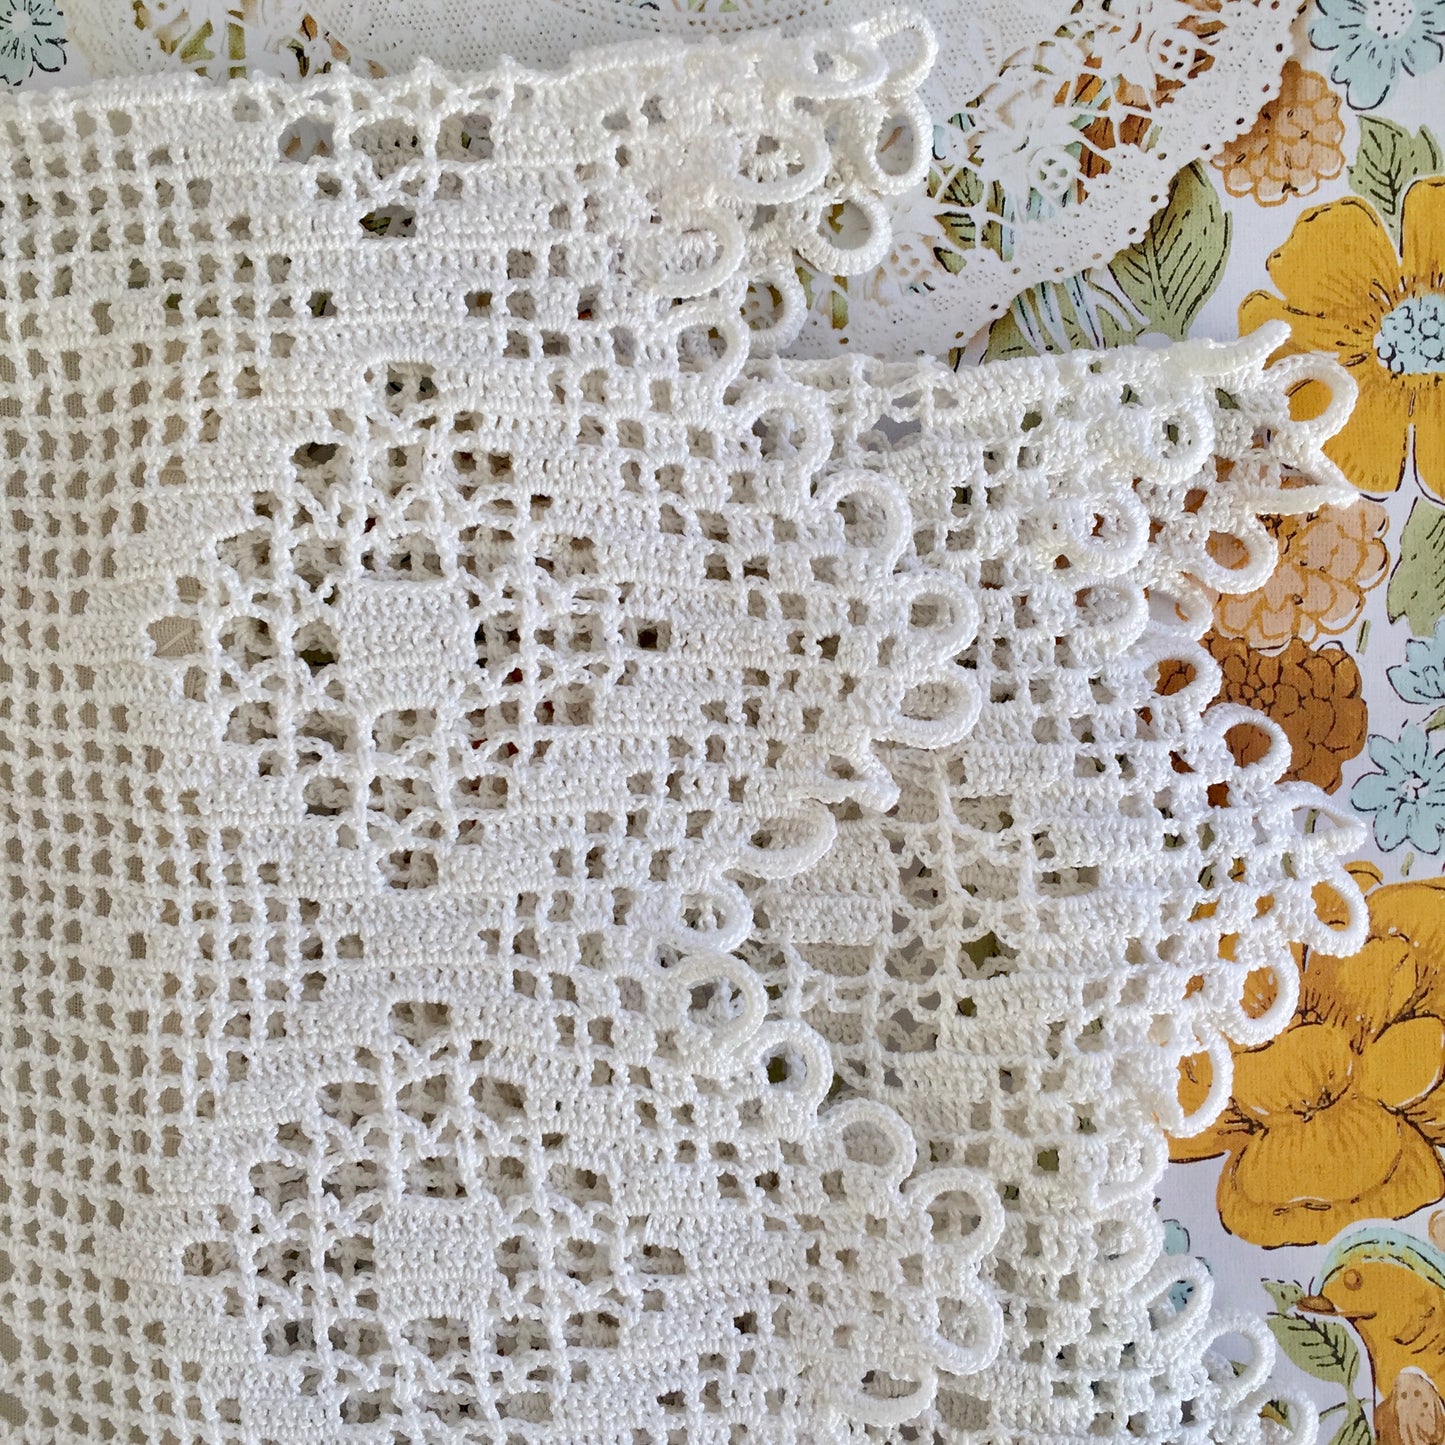 VINTAGE White Embroidered Lace Table Runner PILLOW Bed Topper DIVINE